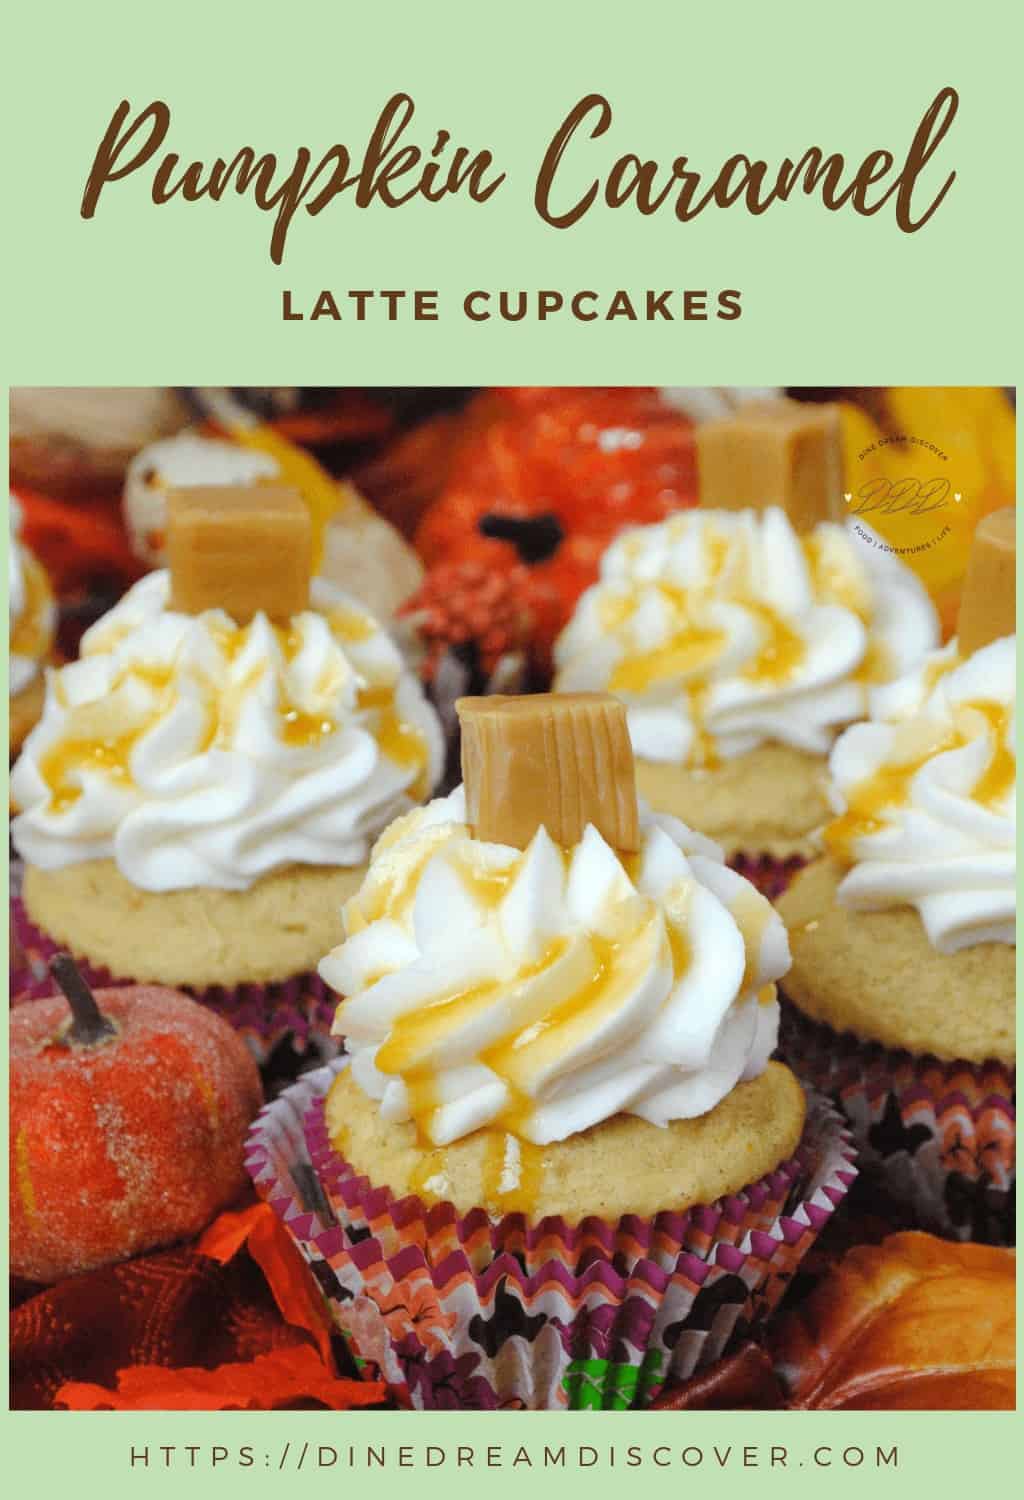 Pumpkin Caramel Latte Cupcake is a blend of pumpkin, caramel, and coffee all rolled into a mouth watering cupcake just in time for fall and pumpkin season.